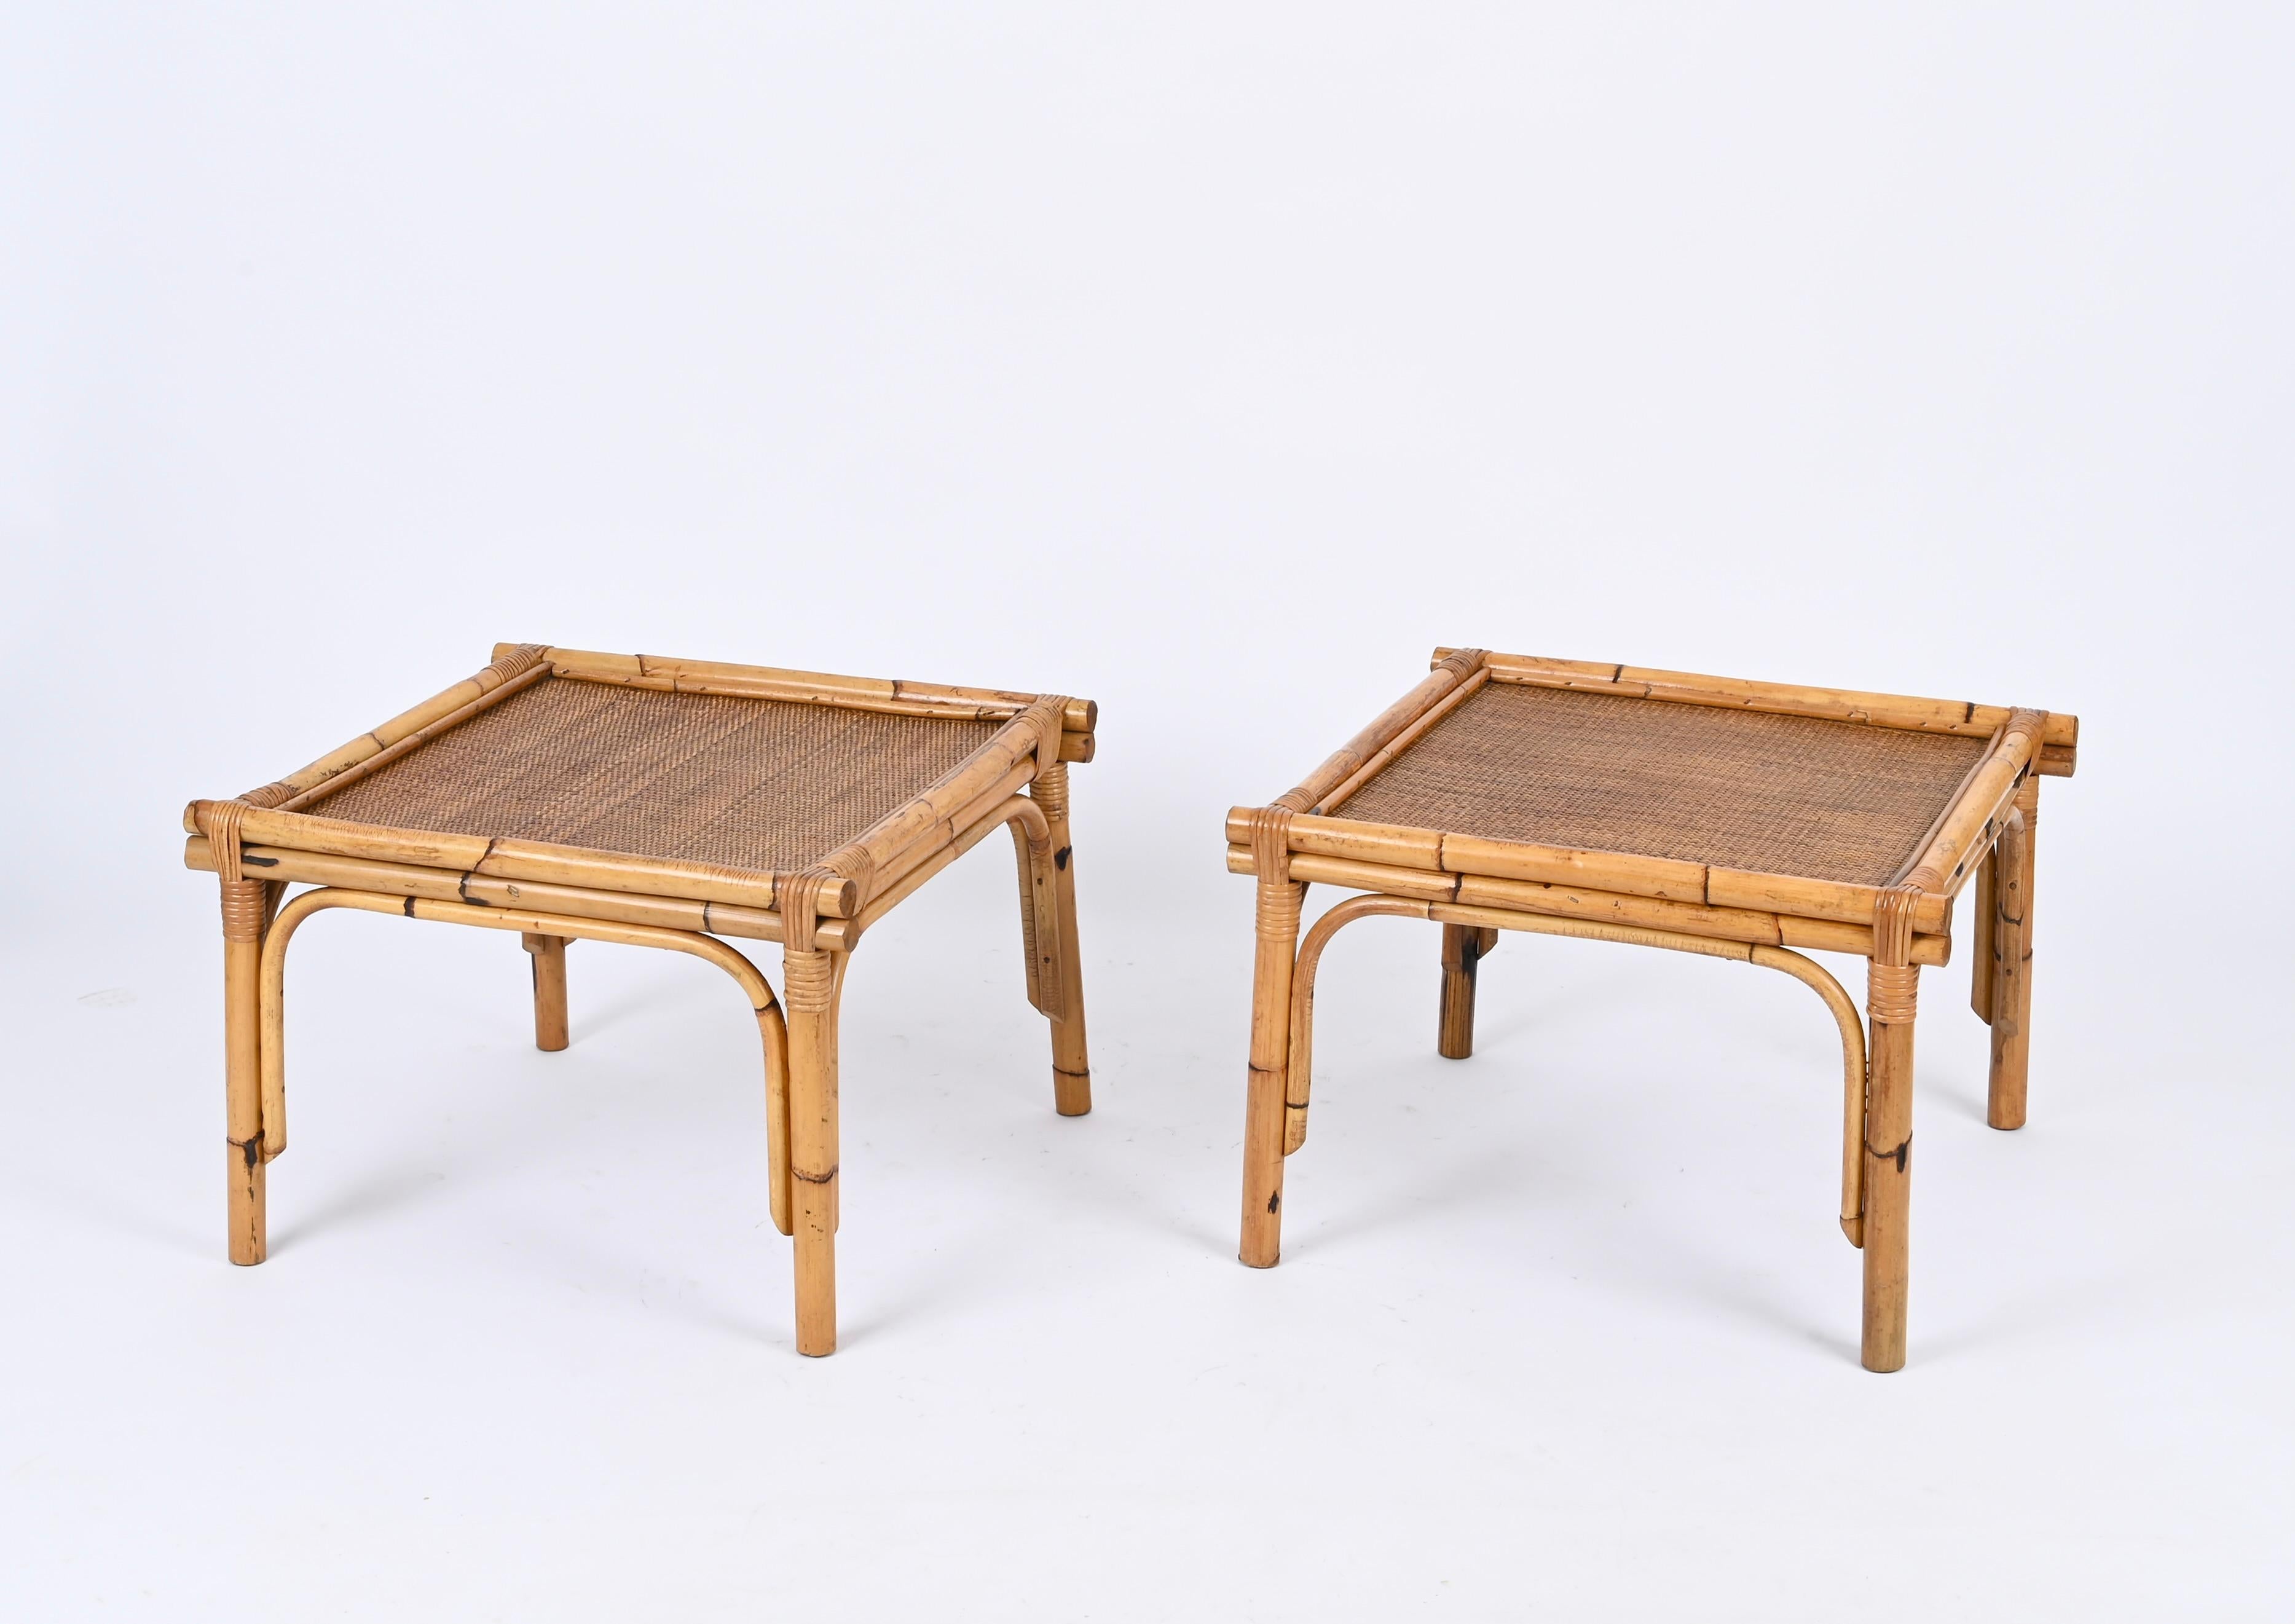 Pair of French Riviera Square Coffee Table in Rattan and Wicker, Italy 1970s For Sale 3